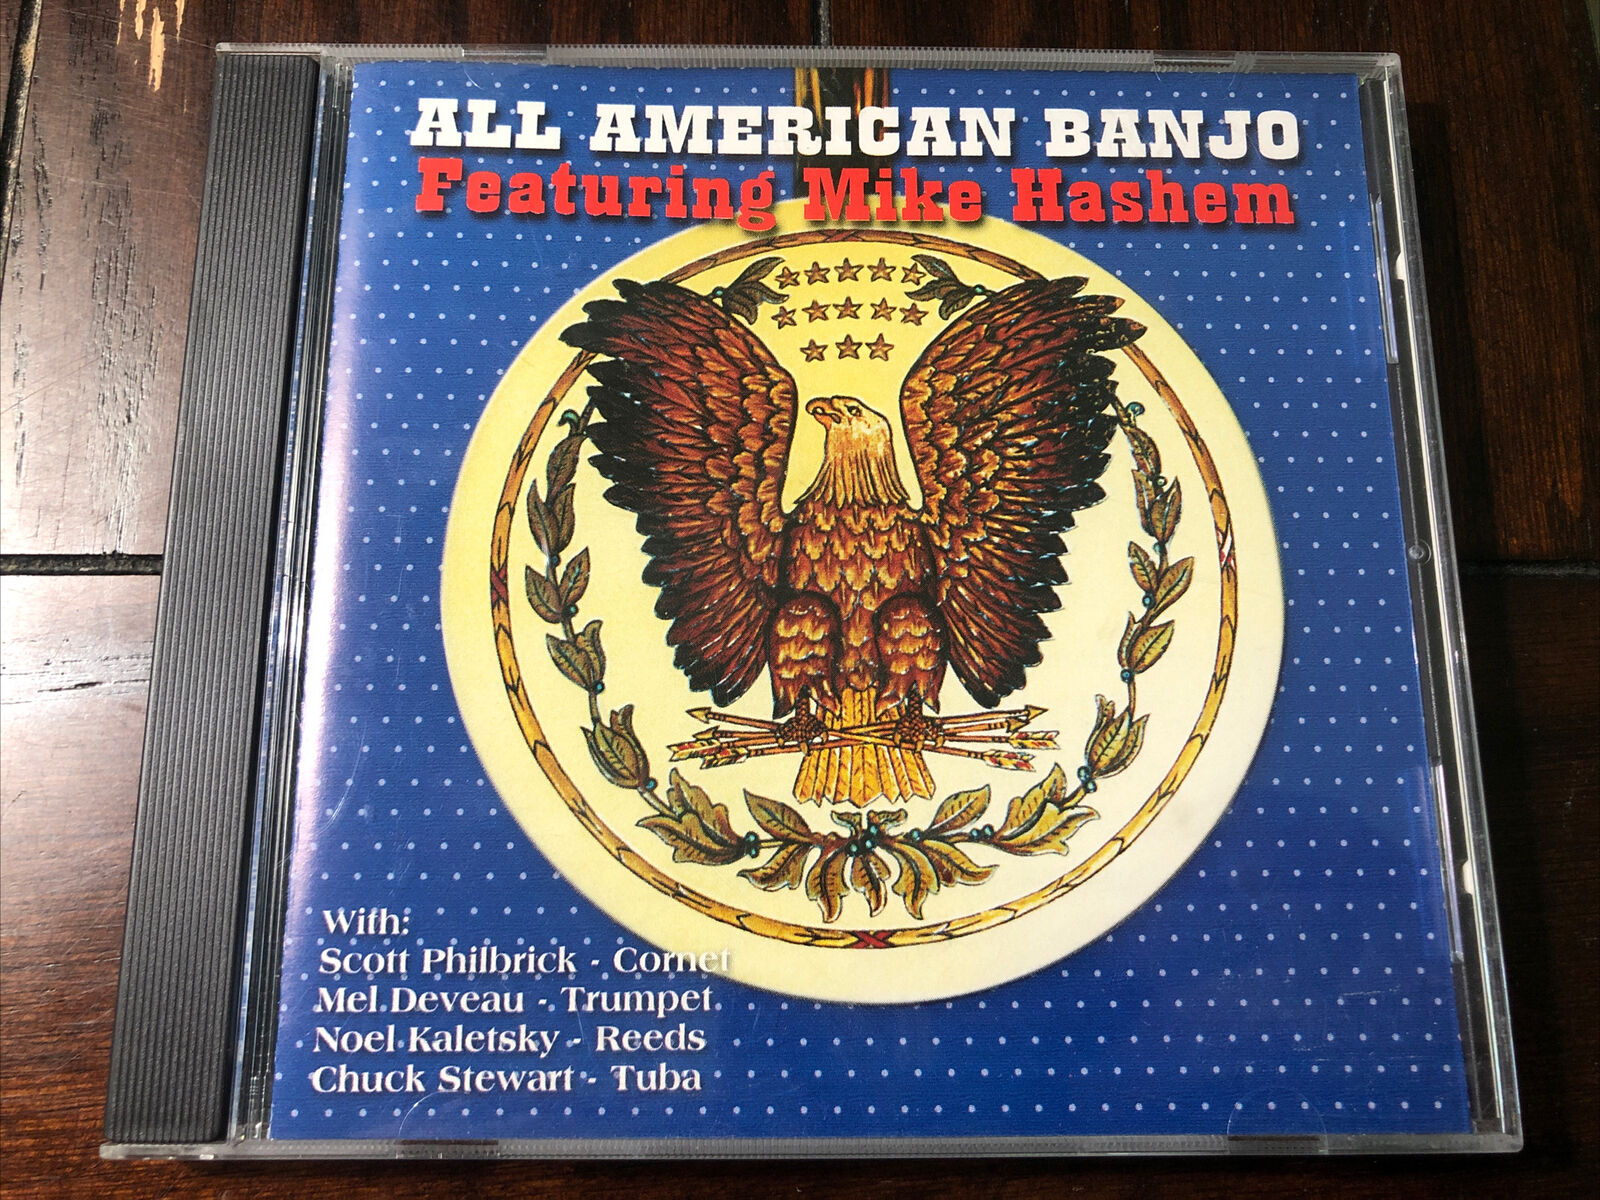 All American Banjo Featuring Mike Hashem CD